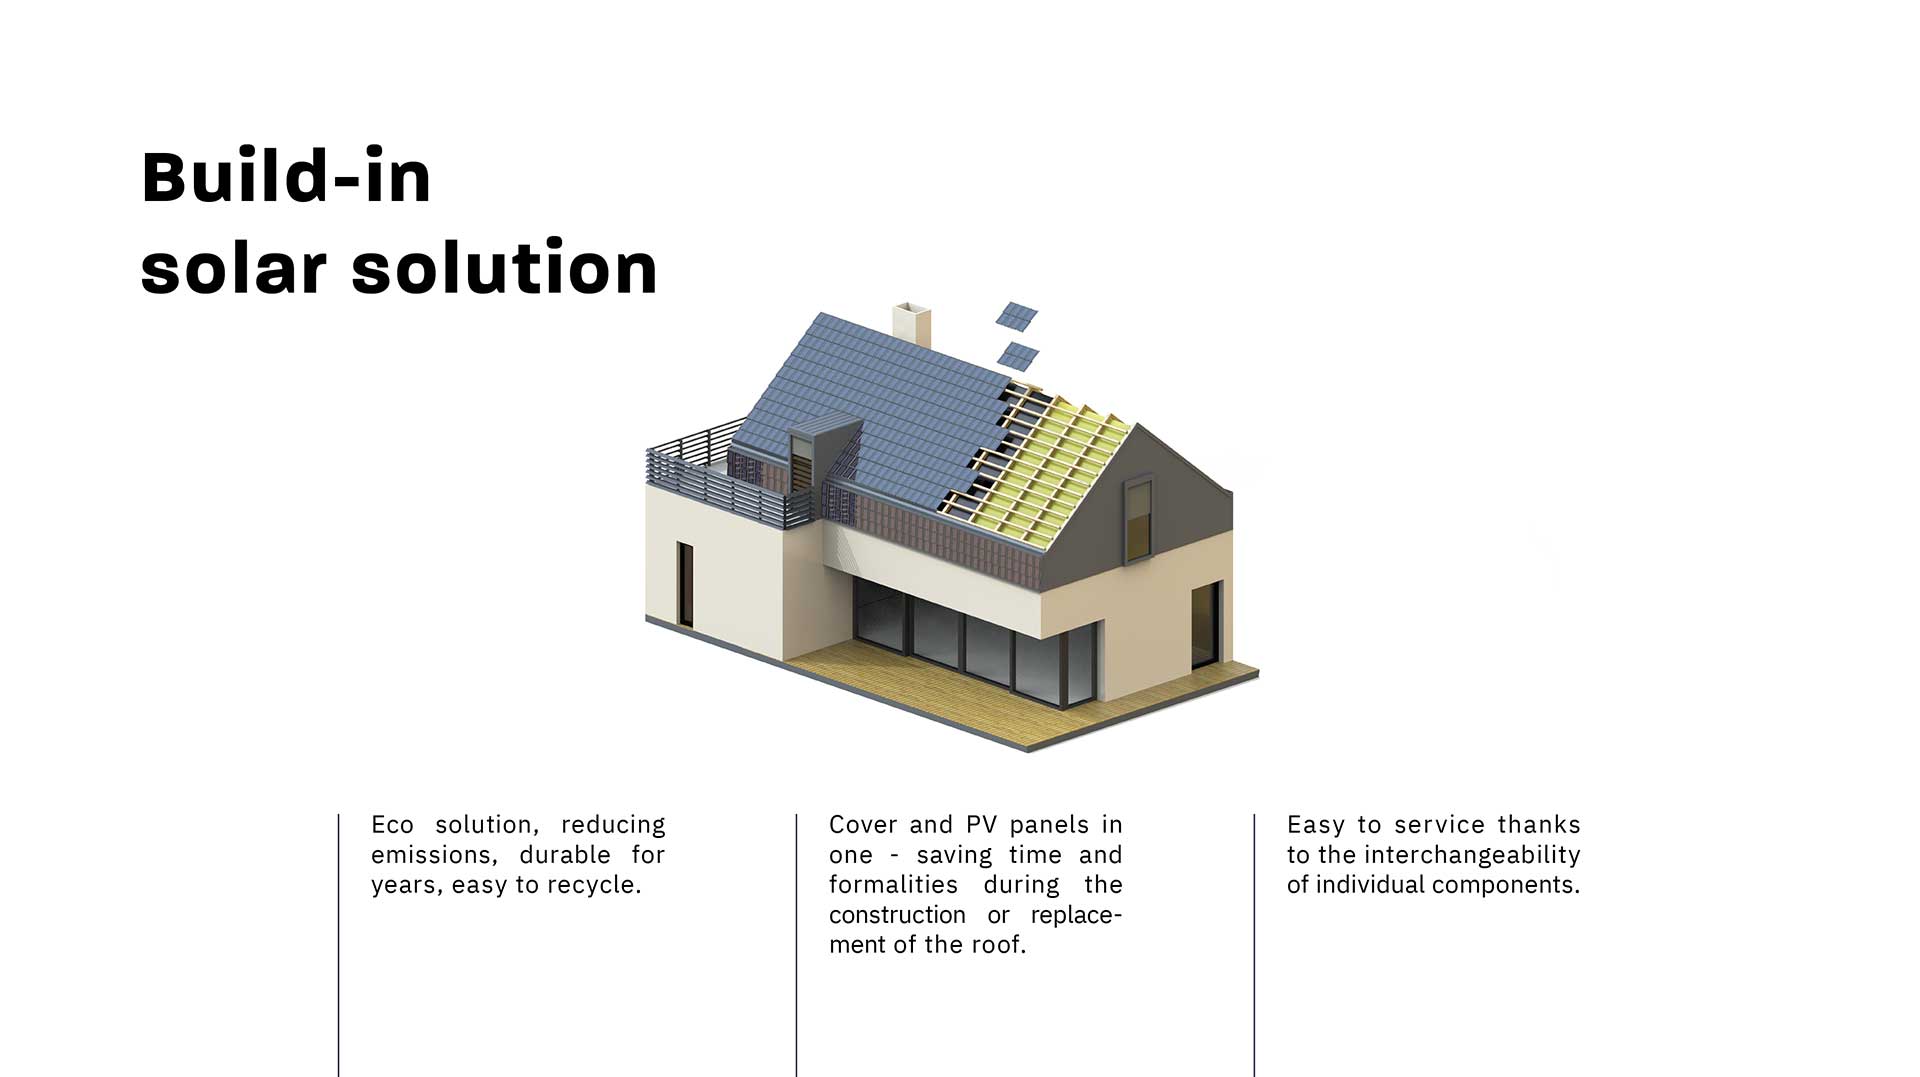 Built-in solar solution - Eco solution, reducing emissions, durable for years, easy to recycle. Cover and PV panels in one - saving time and formalities during the construction or replacement of the roof. Easy to service thanks to the interchangeability of individual components.